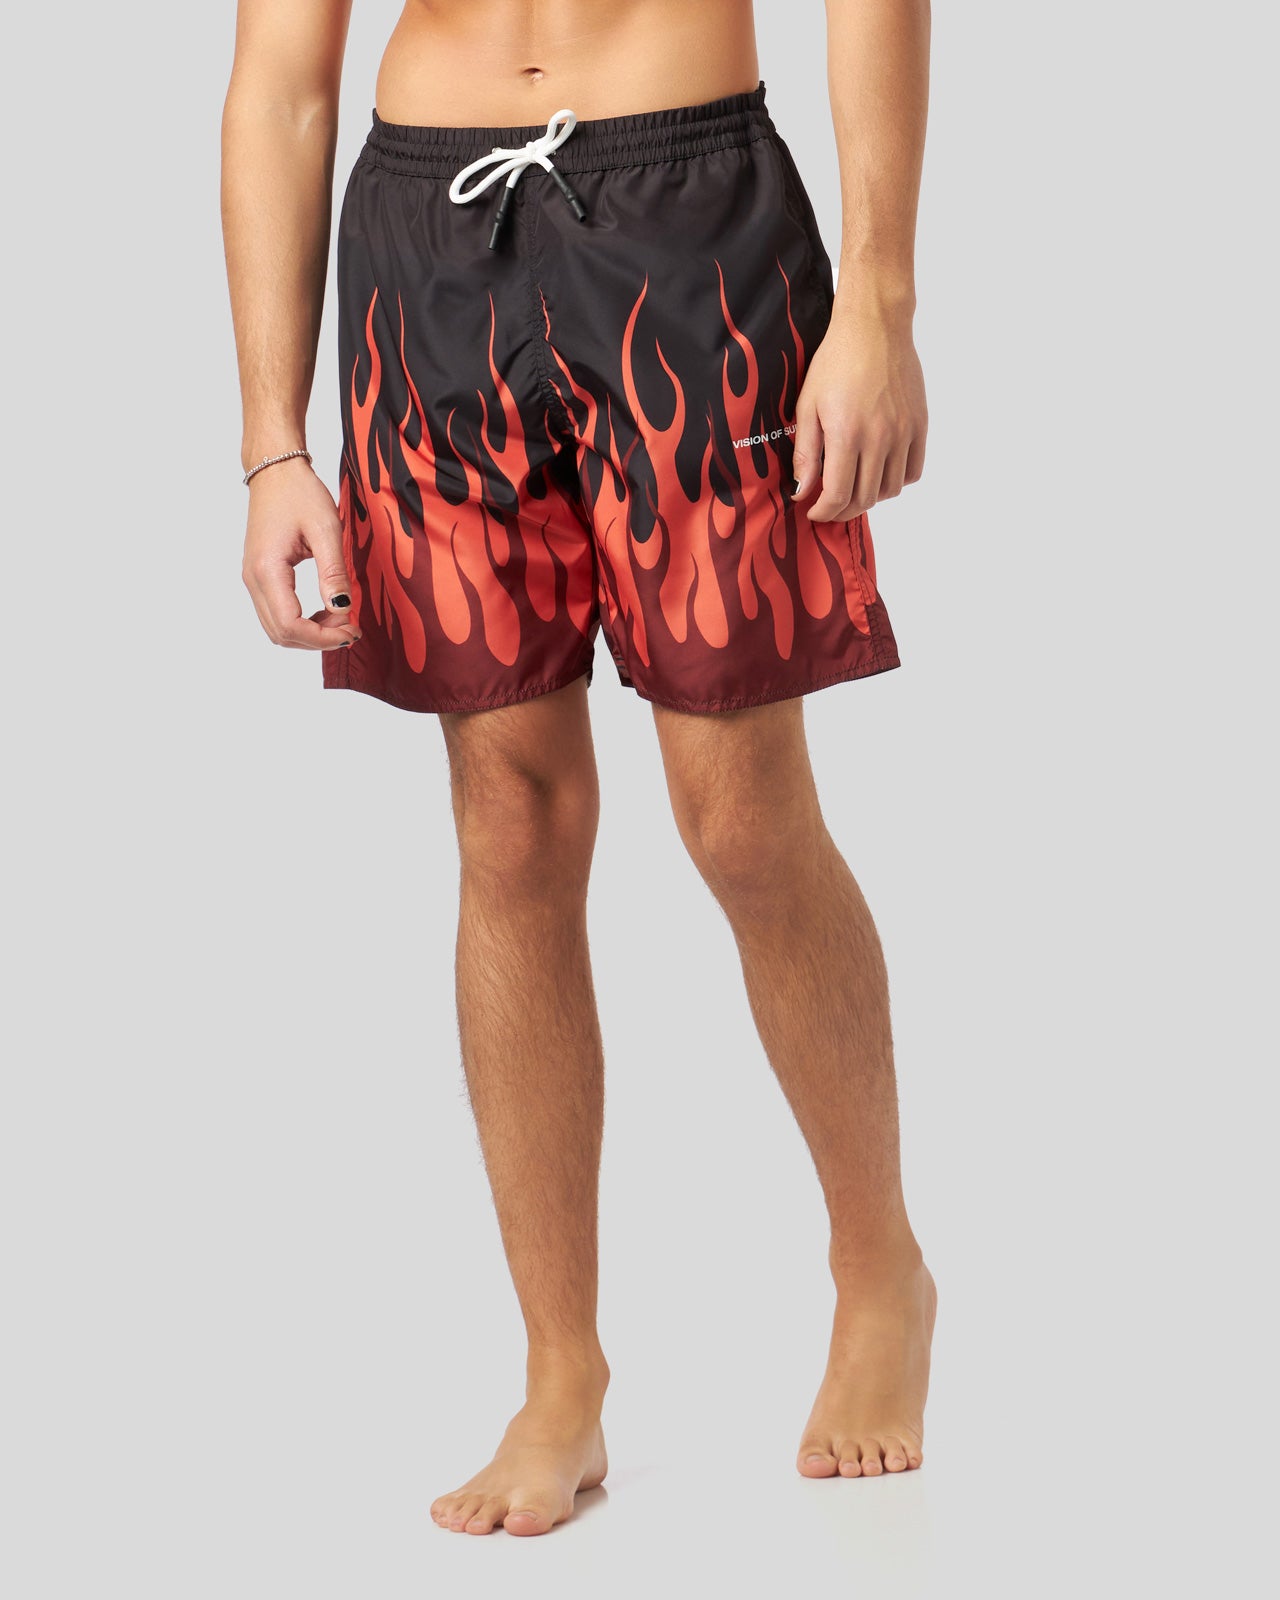 BLACK SWIMWEAR WITH DOUBLE RED FLAMES